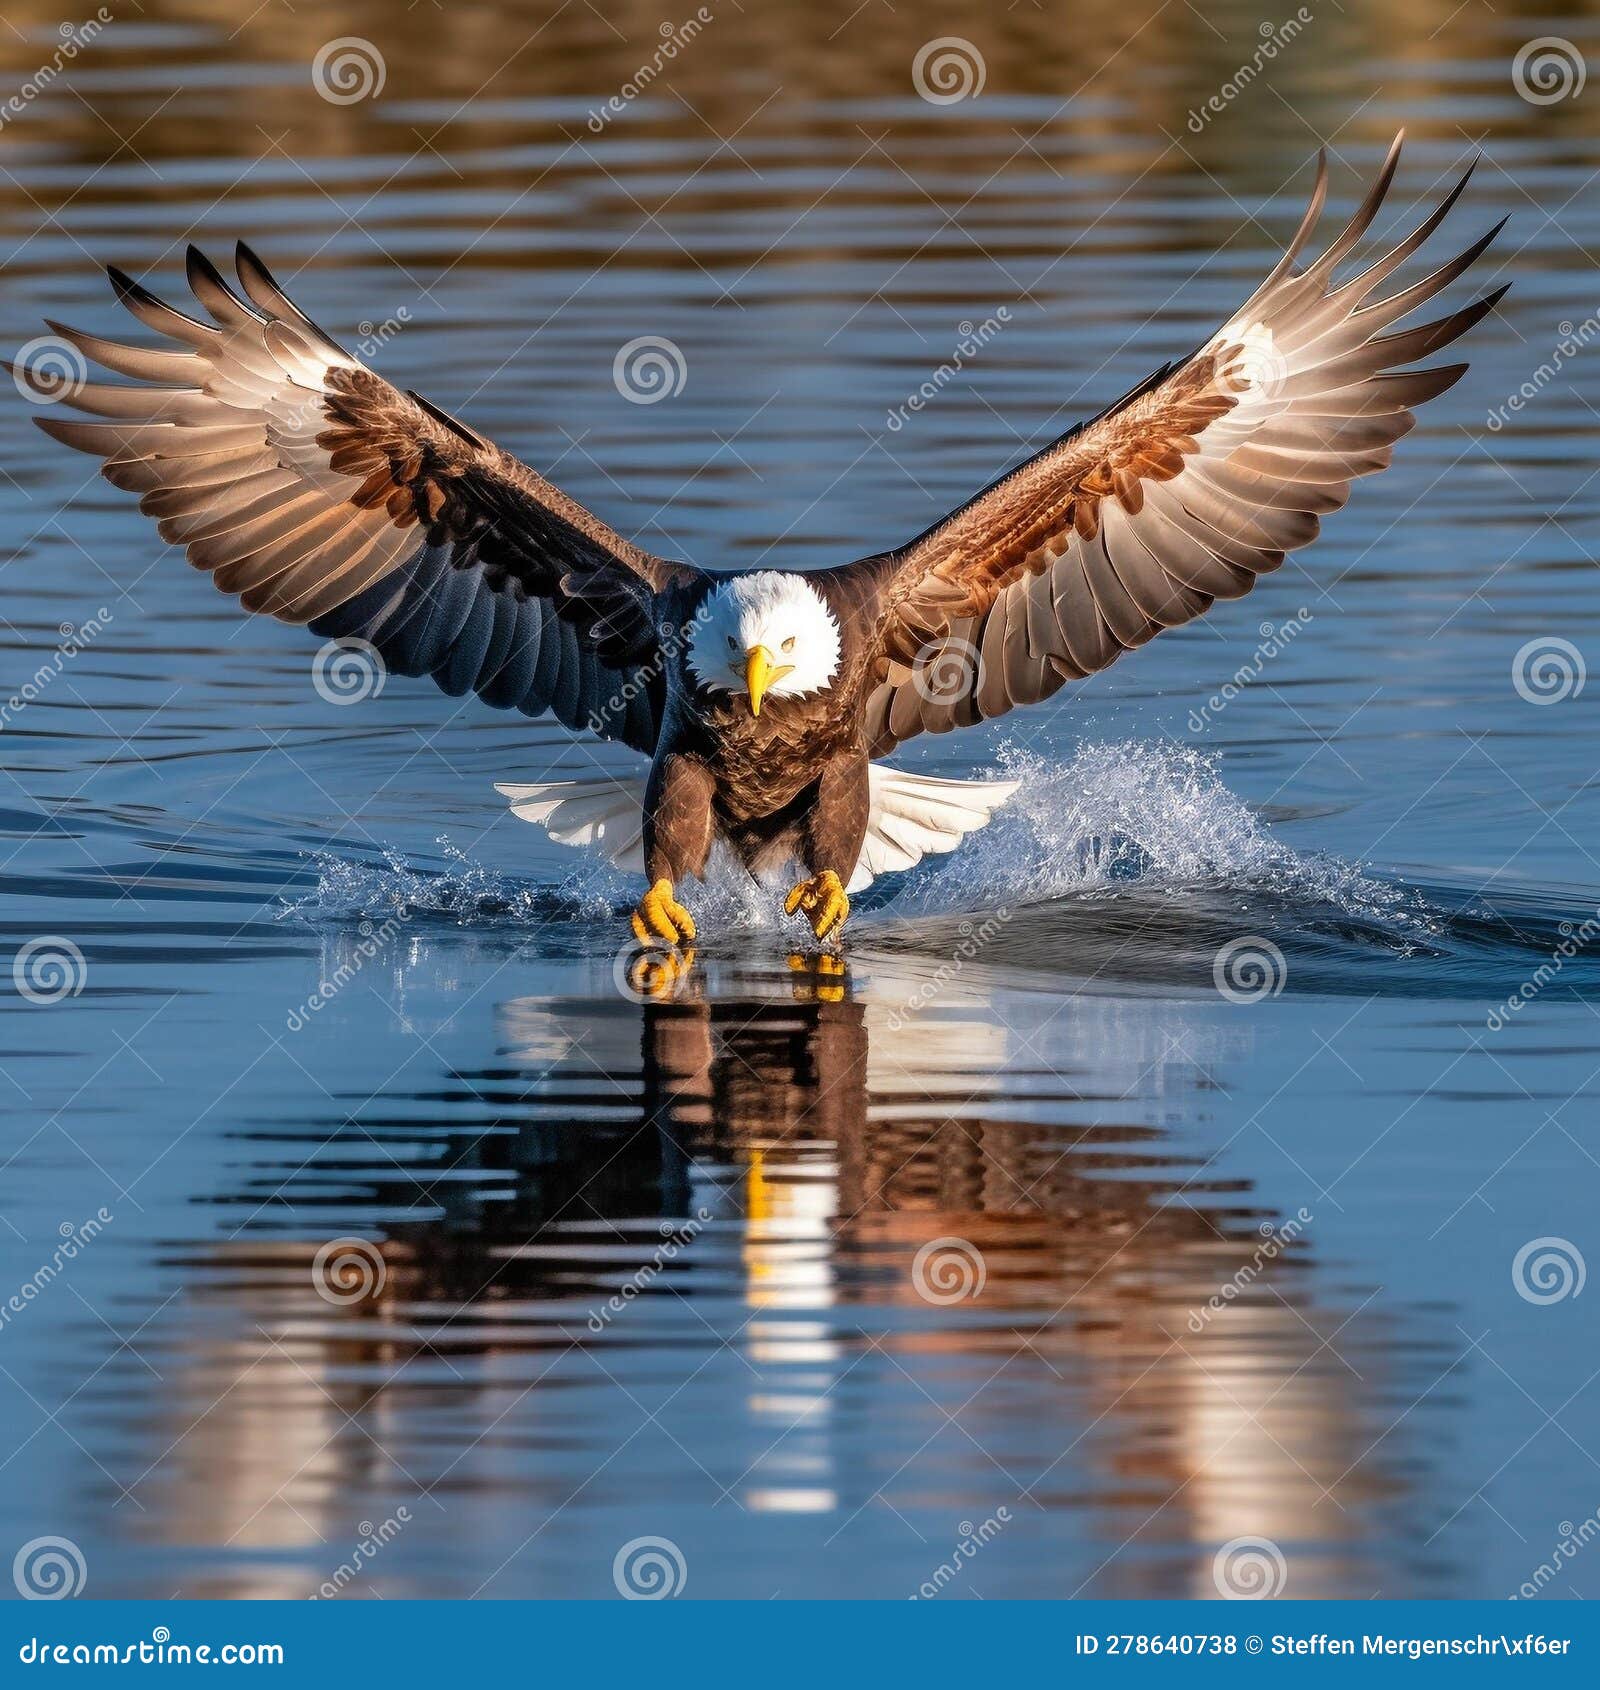 majestic bald eagle soaring above water